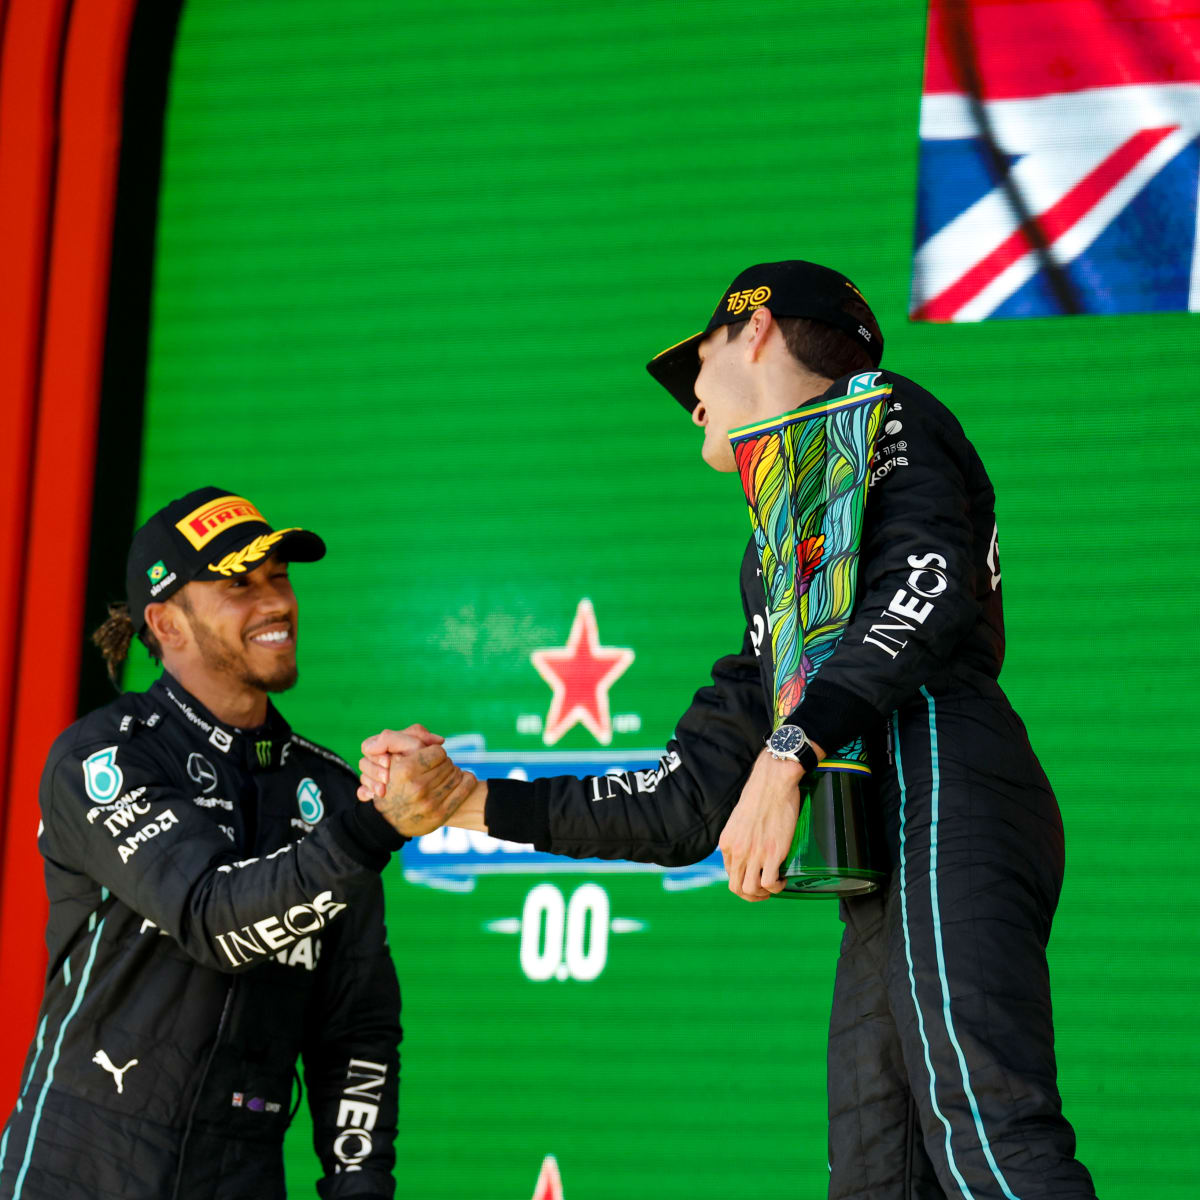 F1 News: Lewis Hamilton confident Mercedes are still the best team after  Brazil triumph - F1 Briefings: Formula 1 News, Rumors, Standings and More